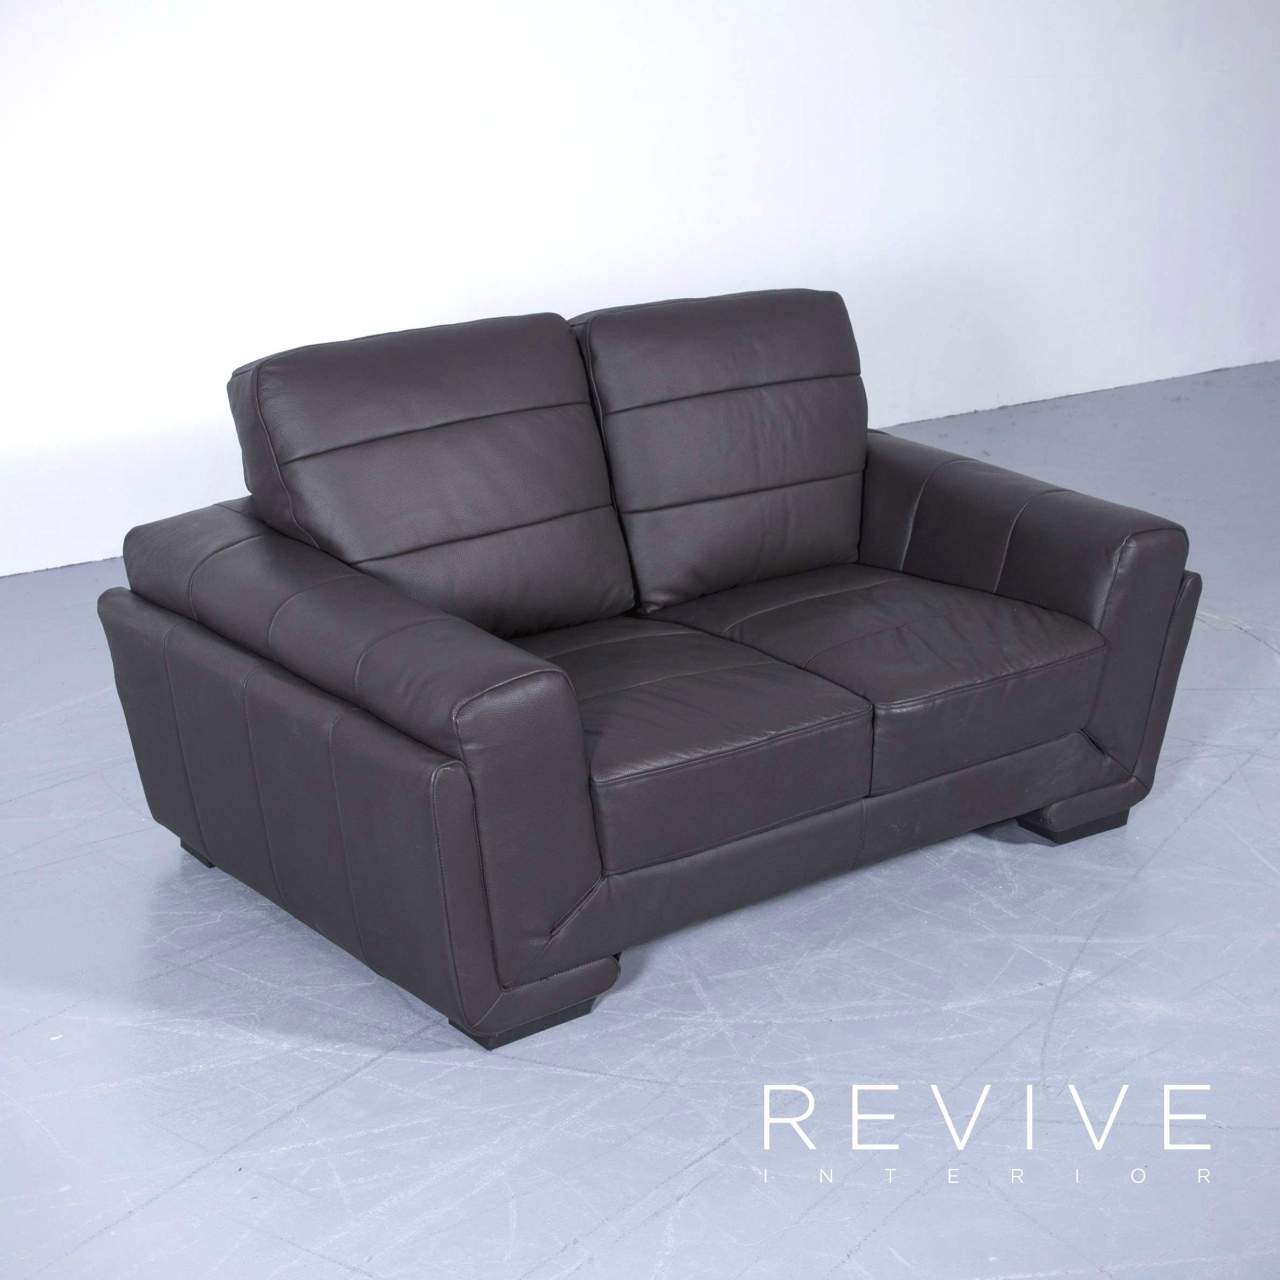 sofa bed couch sofa bauen inspirierend sofa design best graue couch 0d archives durch sofa bed couch